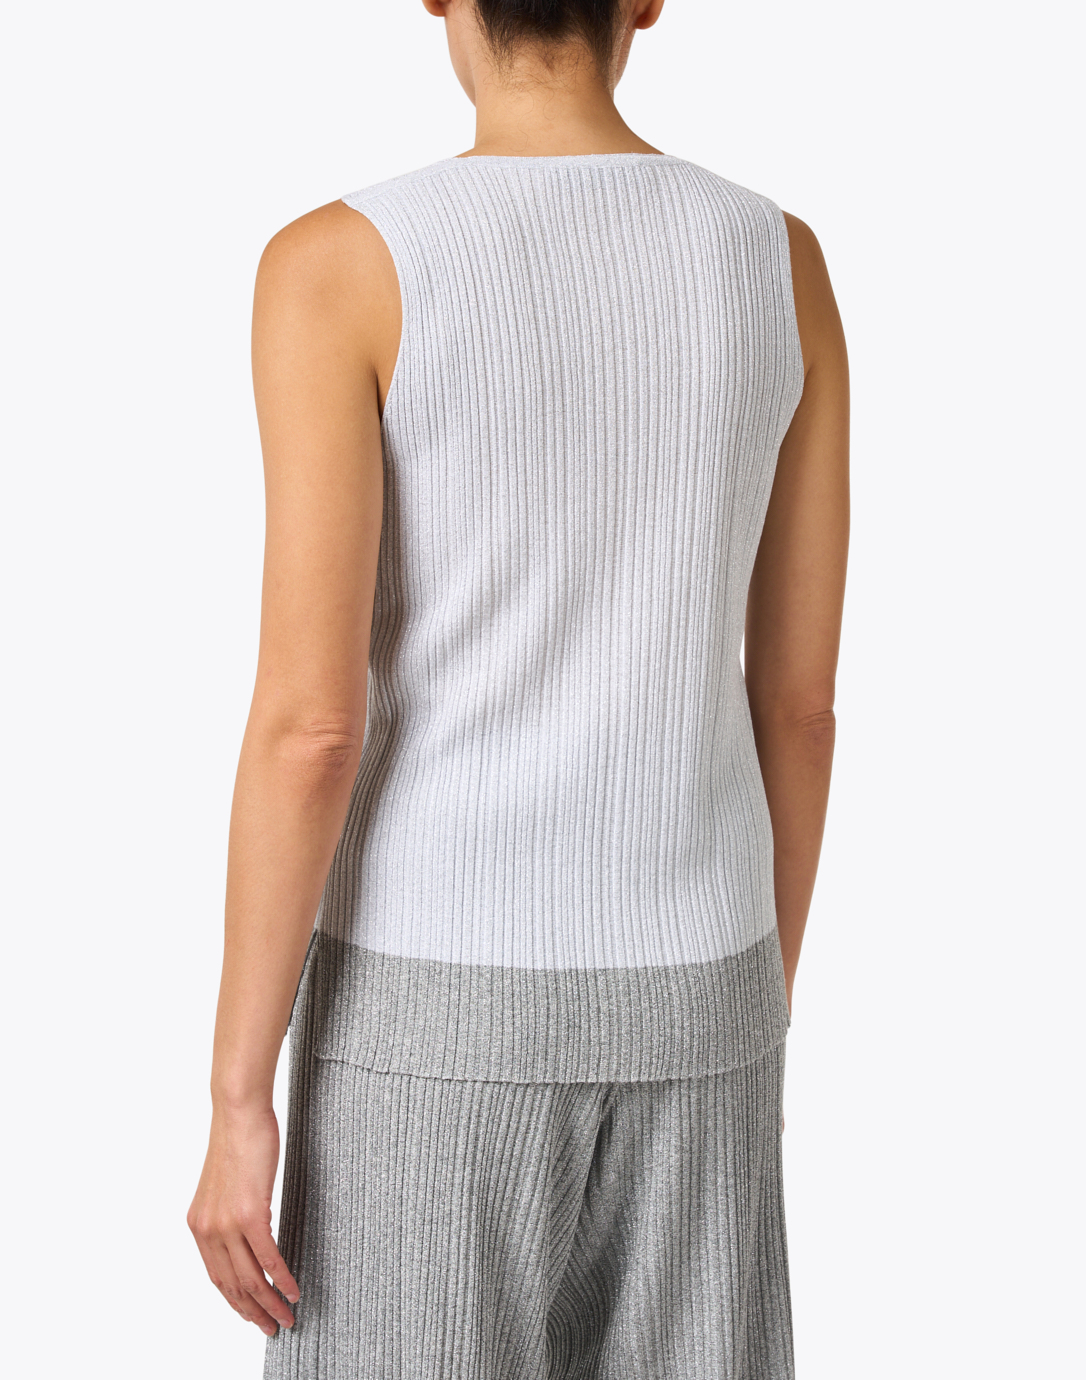 Stay Extra Heather Grey Ribbed V-Neck Crop Top